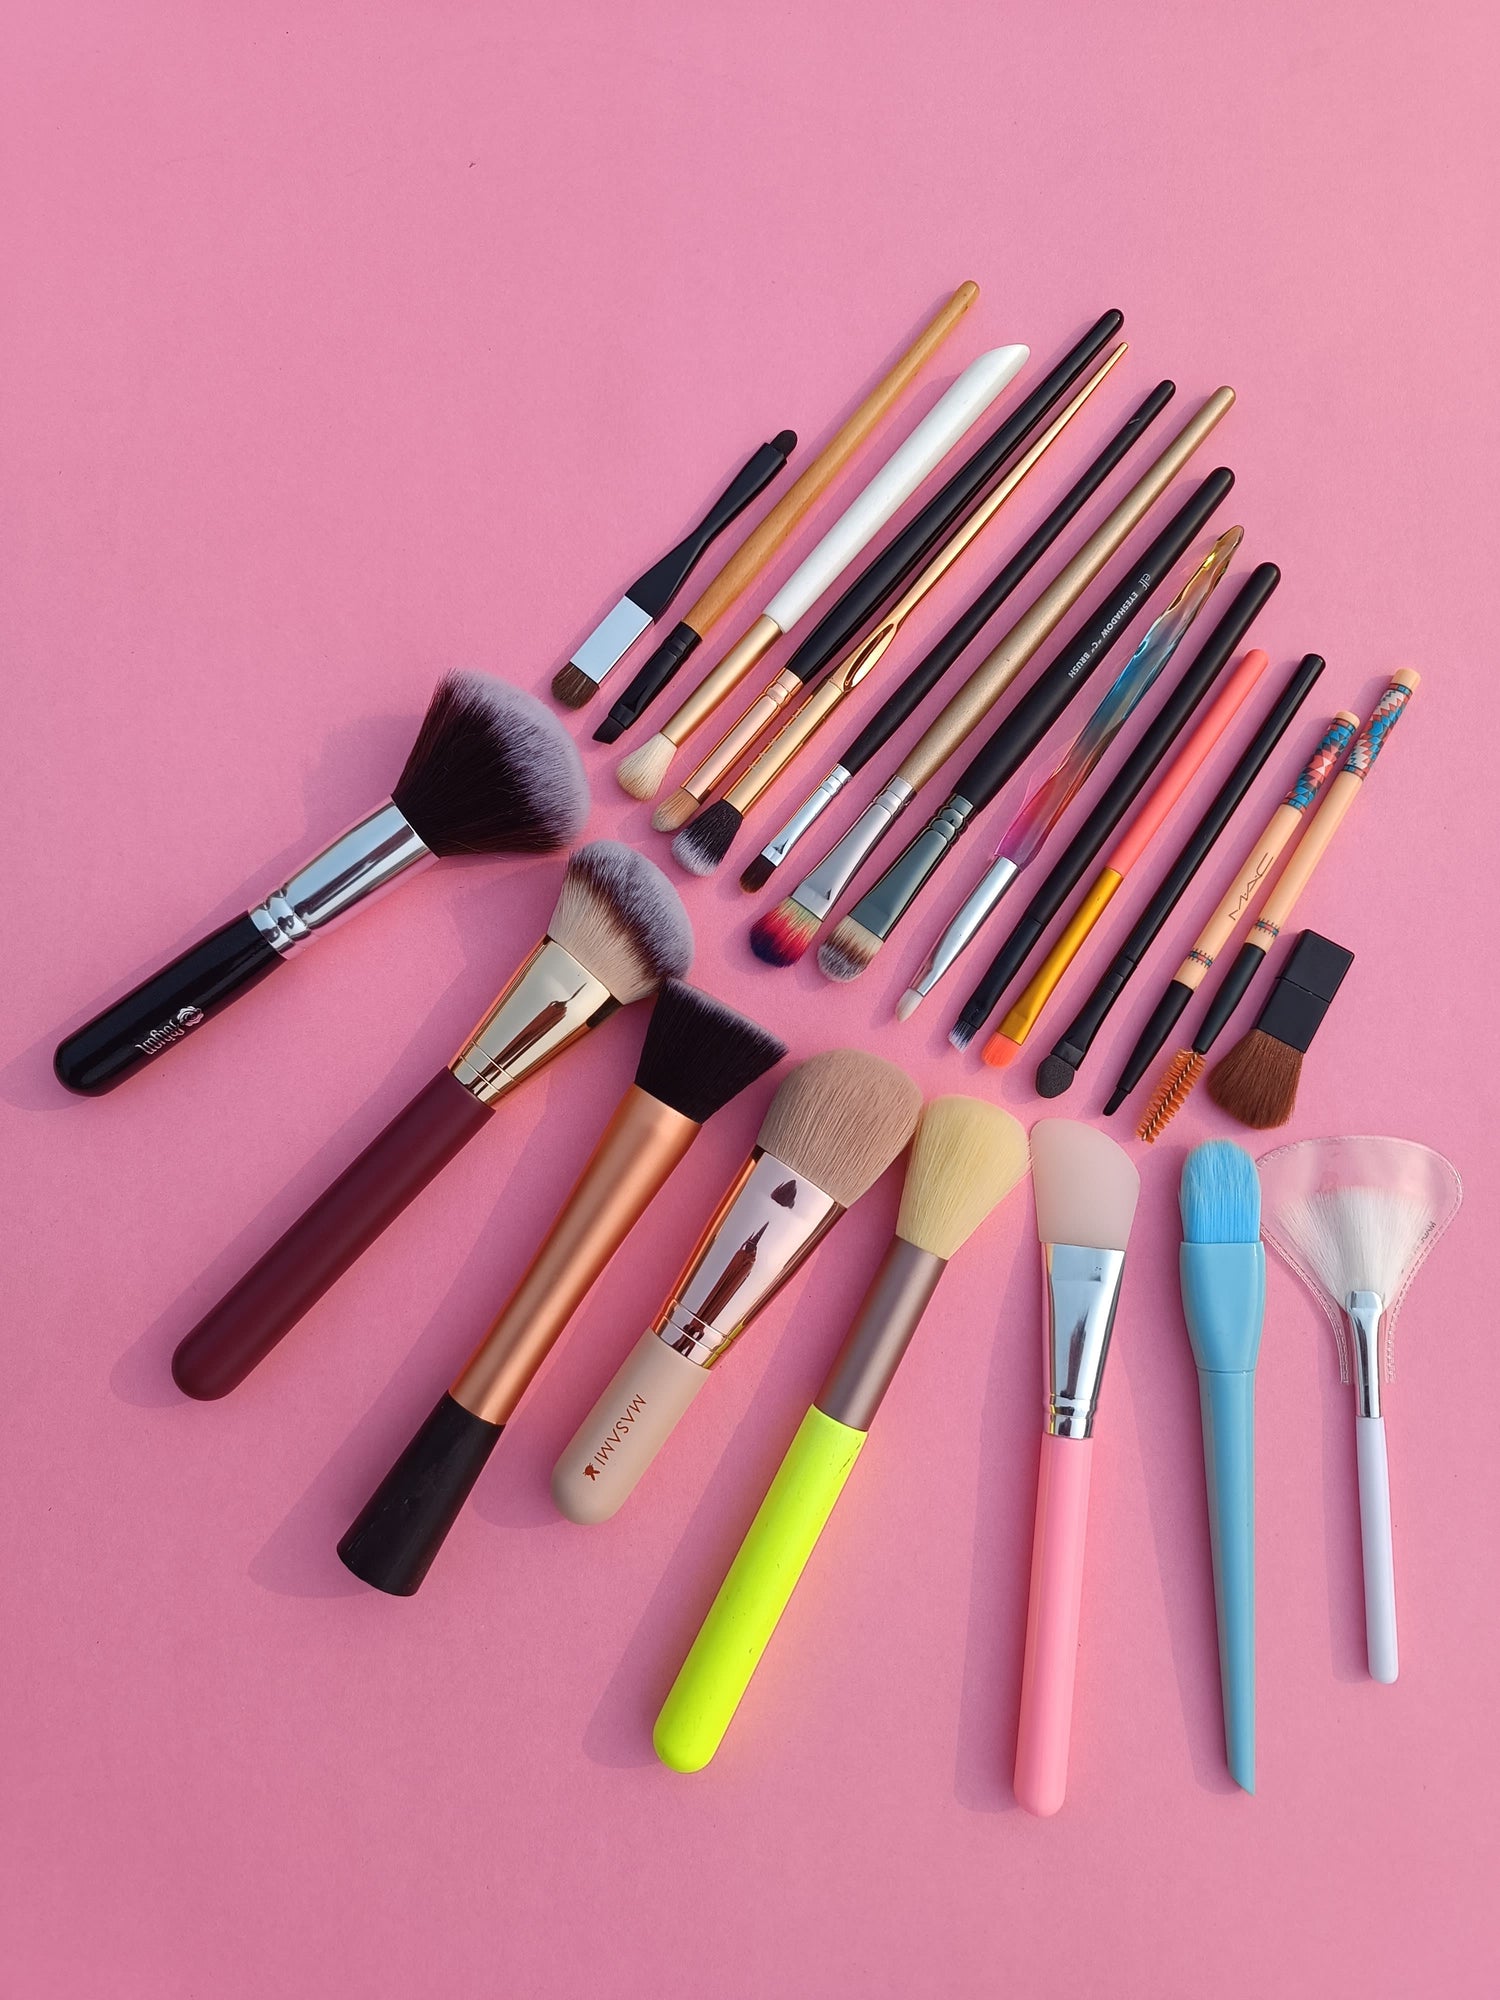 Makeup Brushes Mix In Kgs